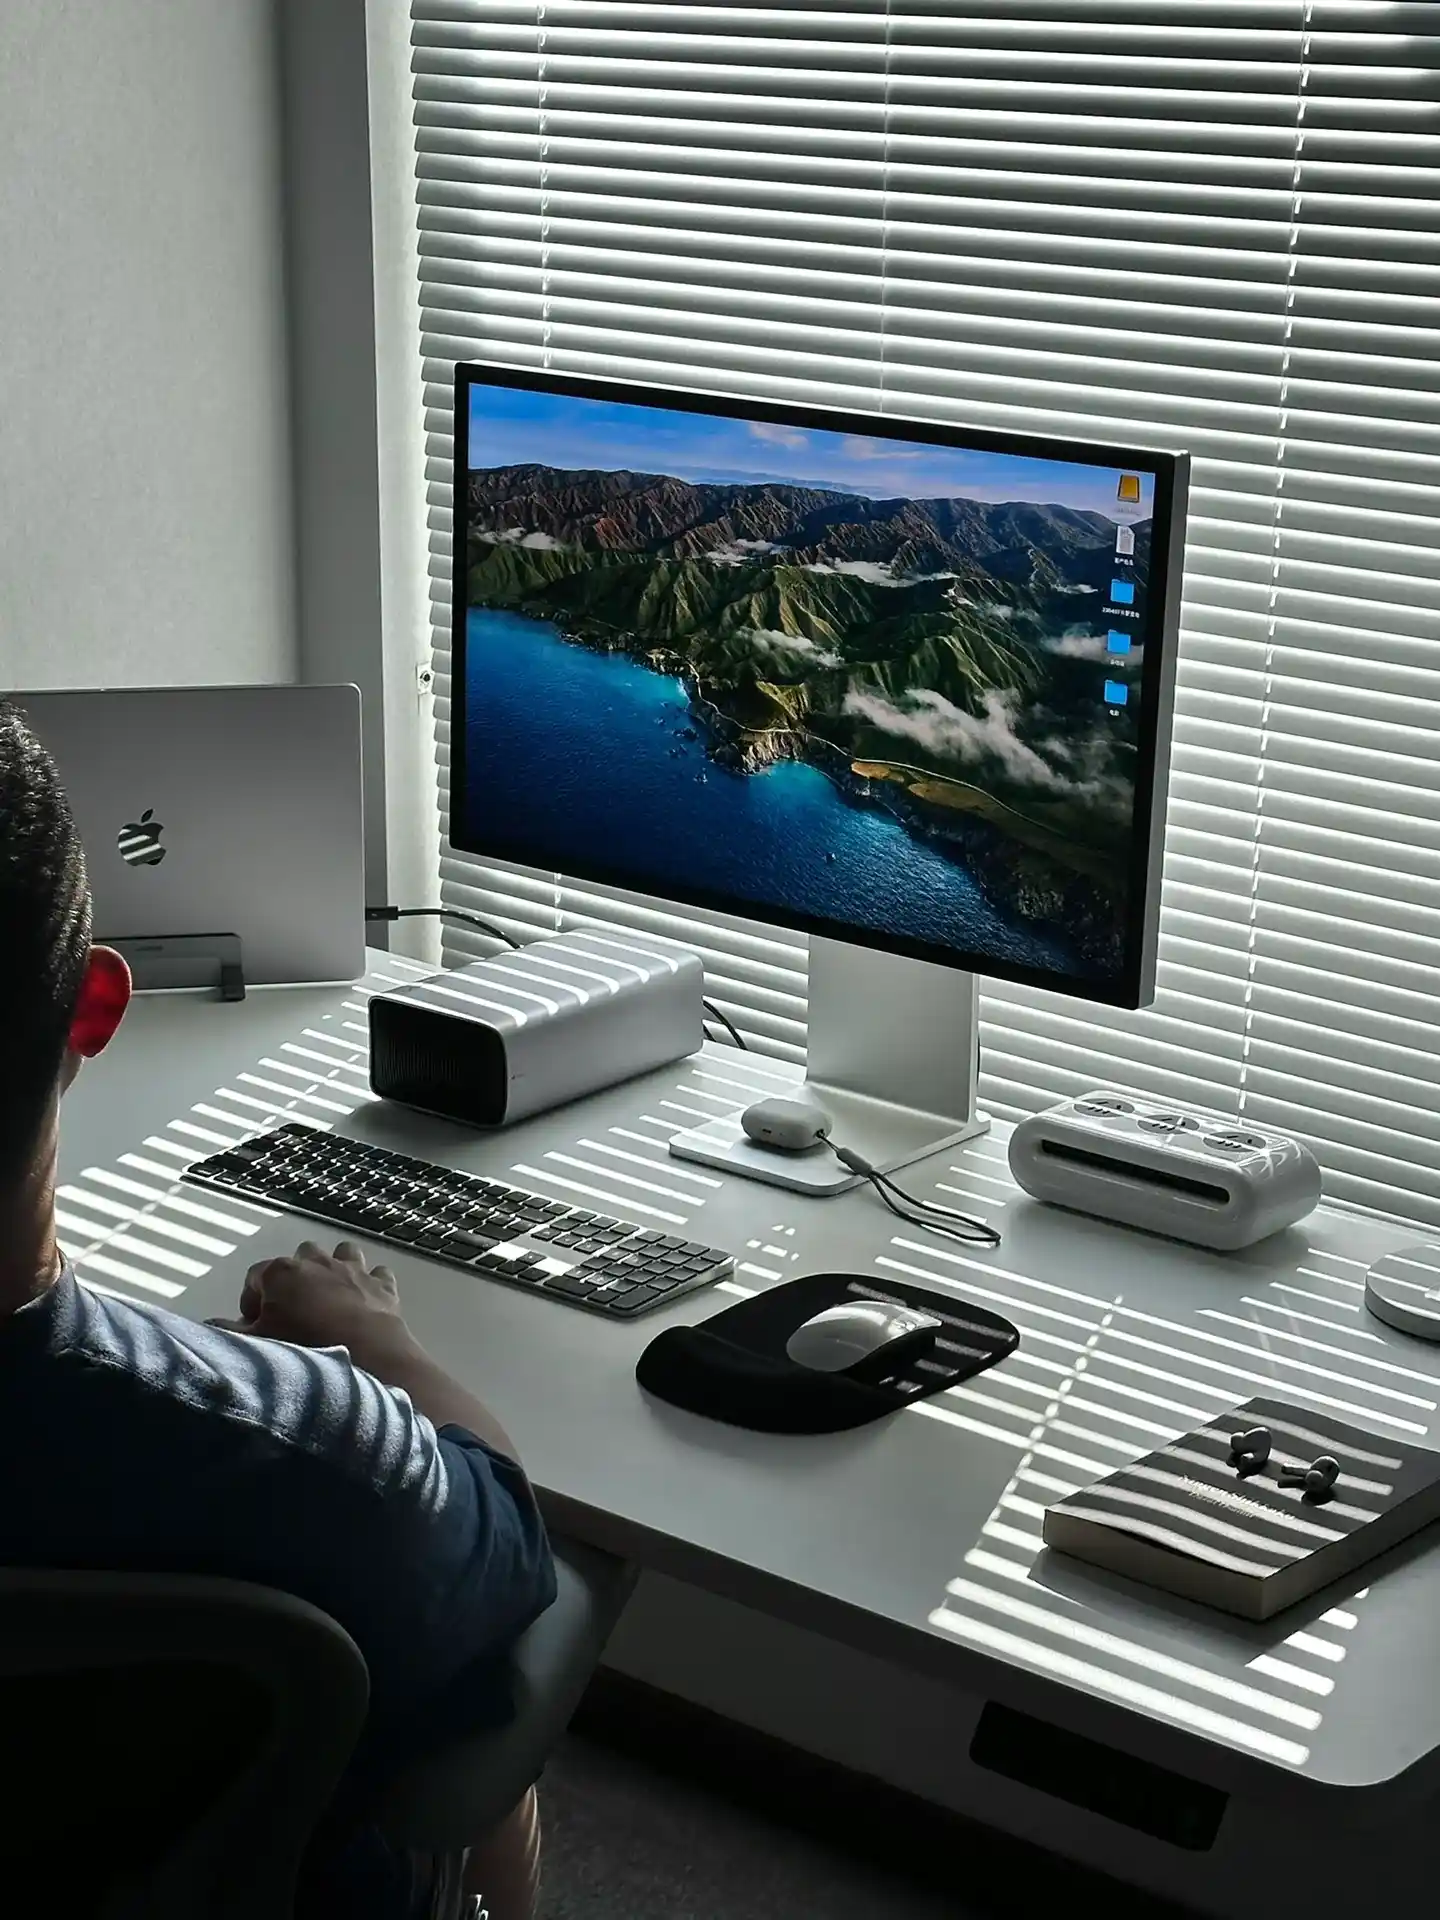 Modern desk decor setup for guys with a monitor displaying scenic mountains, Apple devices, striped blinds casting shadows, and minimalist accessories